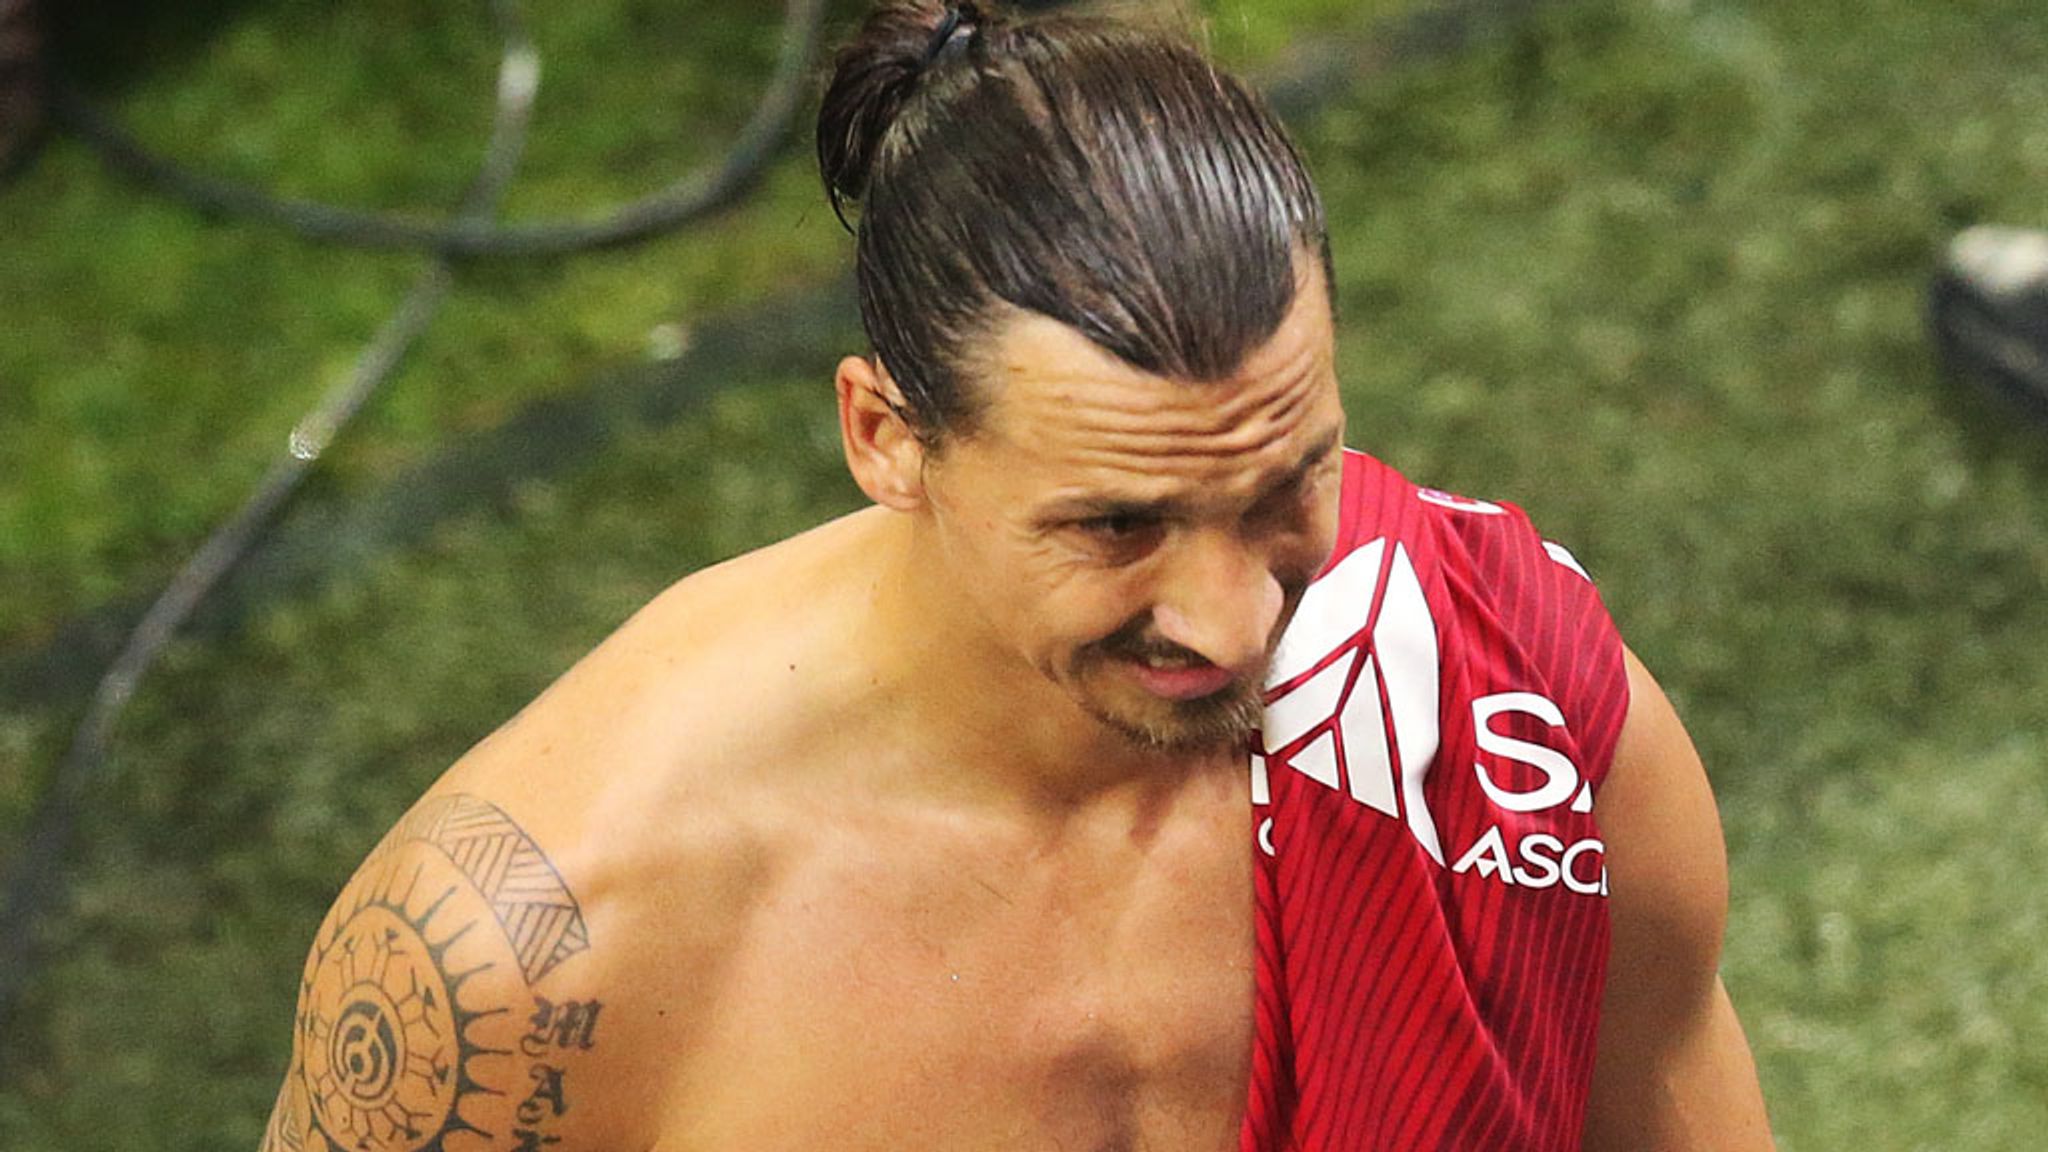 Why Zlatan dedicated tattoo to man next to him in latest post – explained -  Football | Tribuna.com